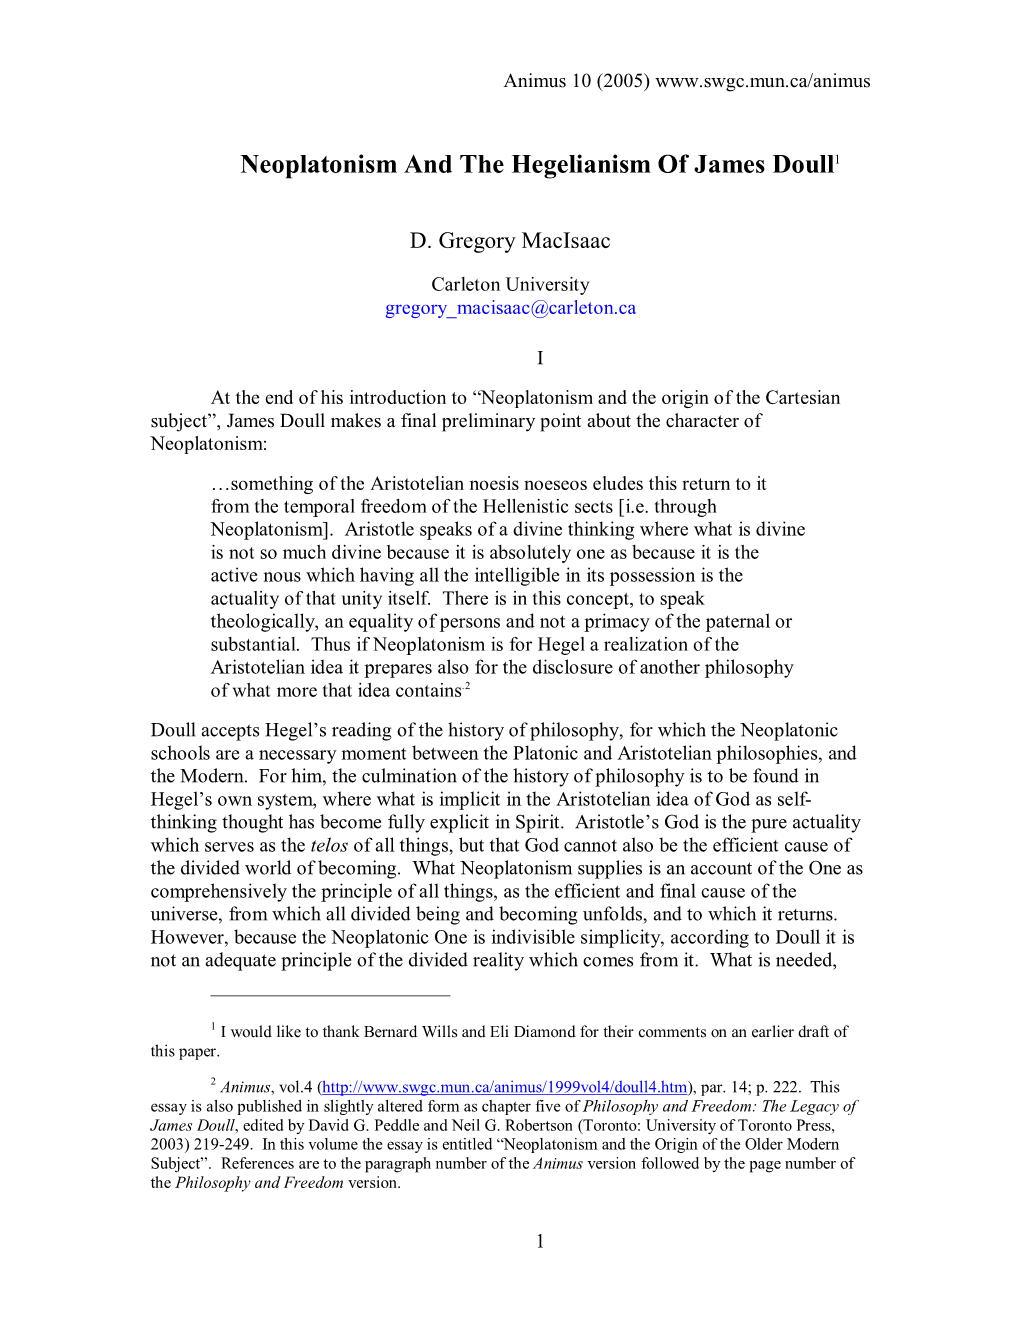 Neoplatonism and the Hegelianism of James Doull1